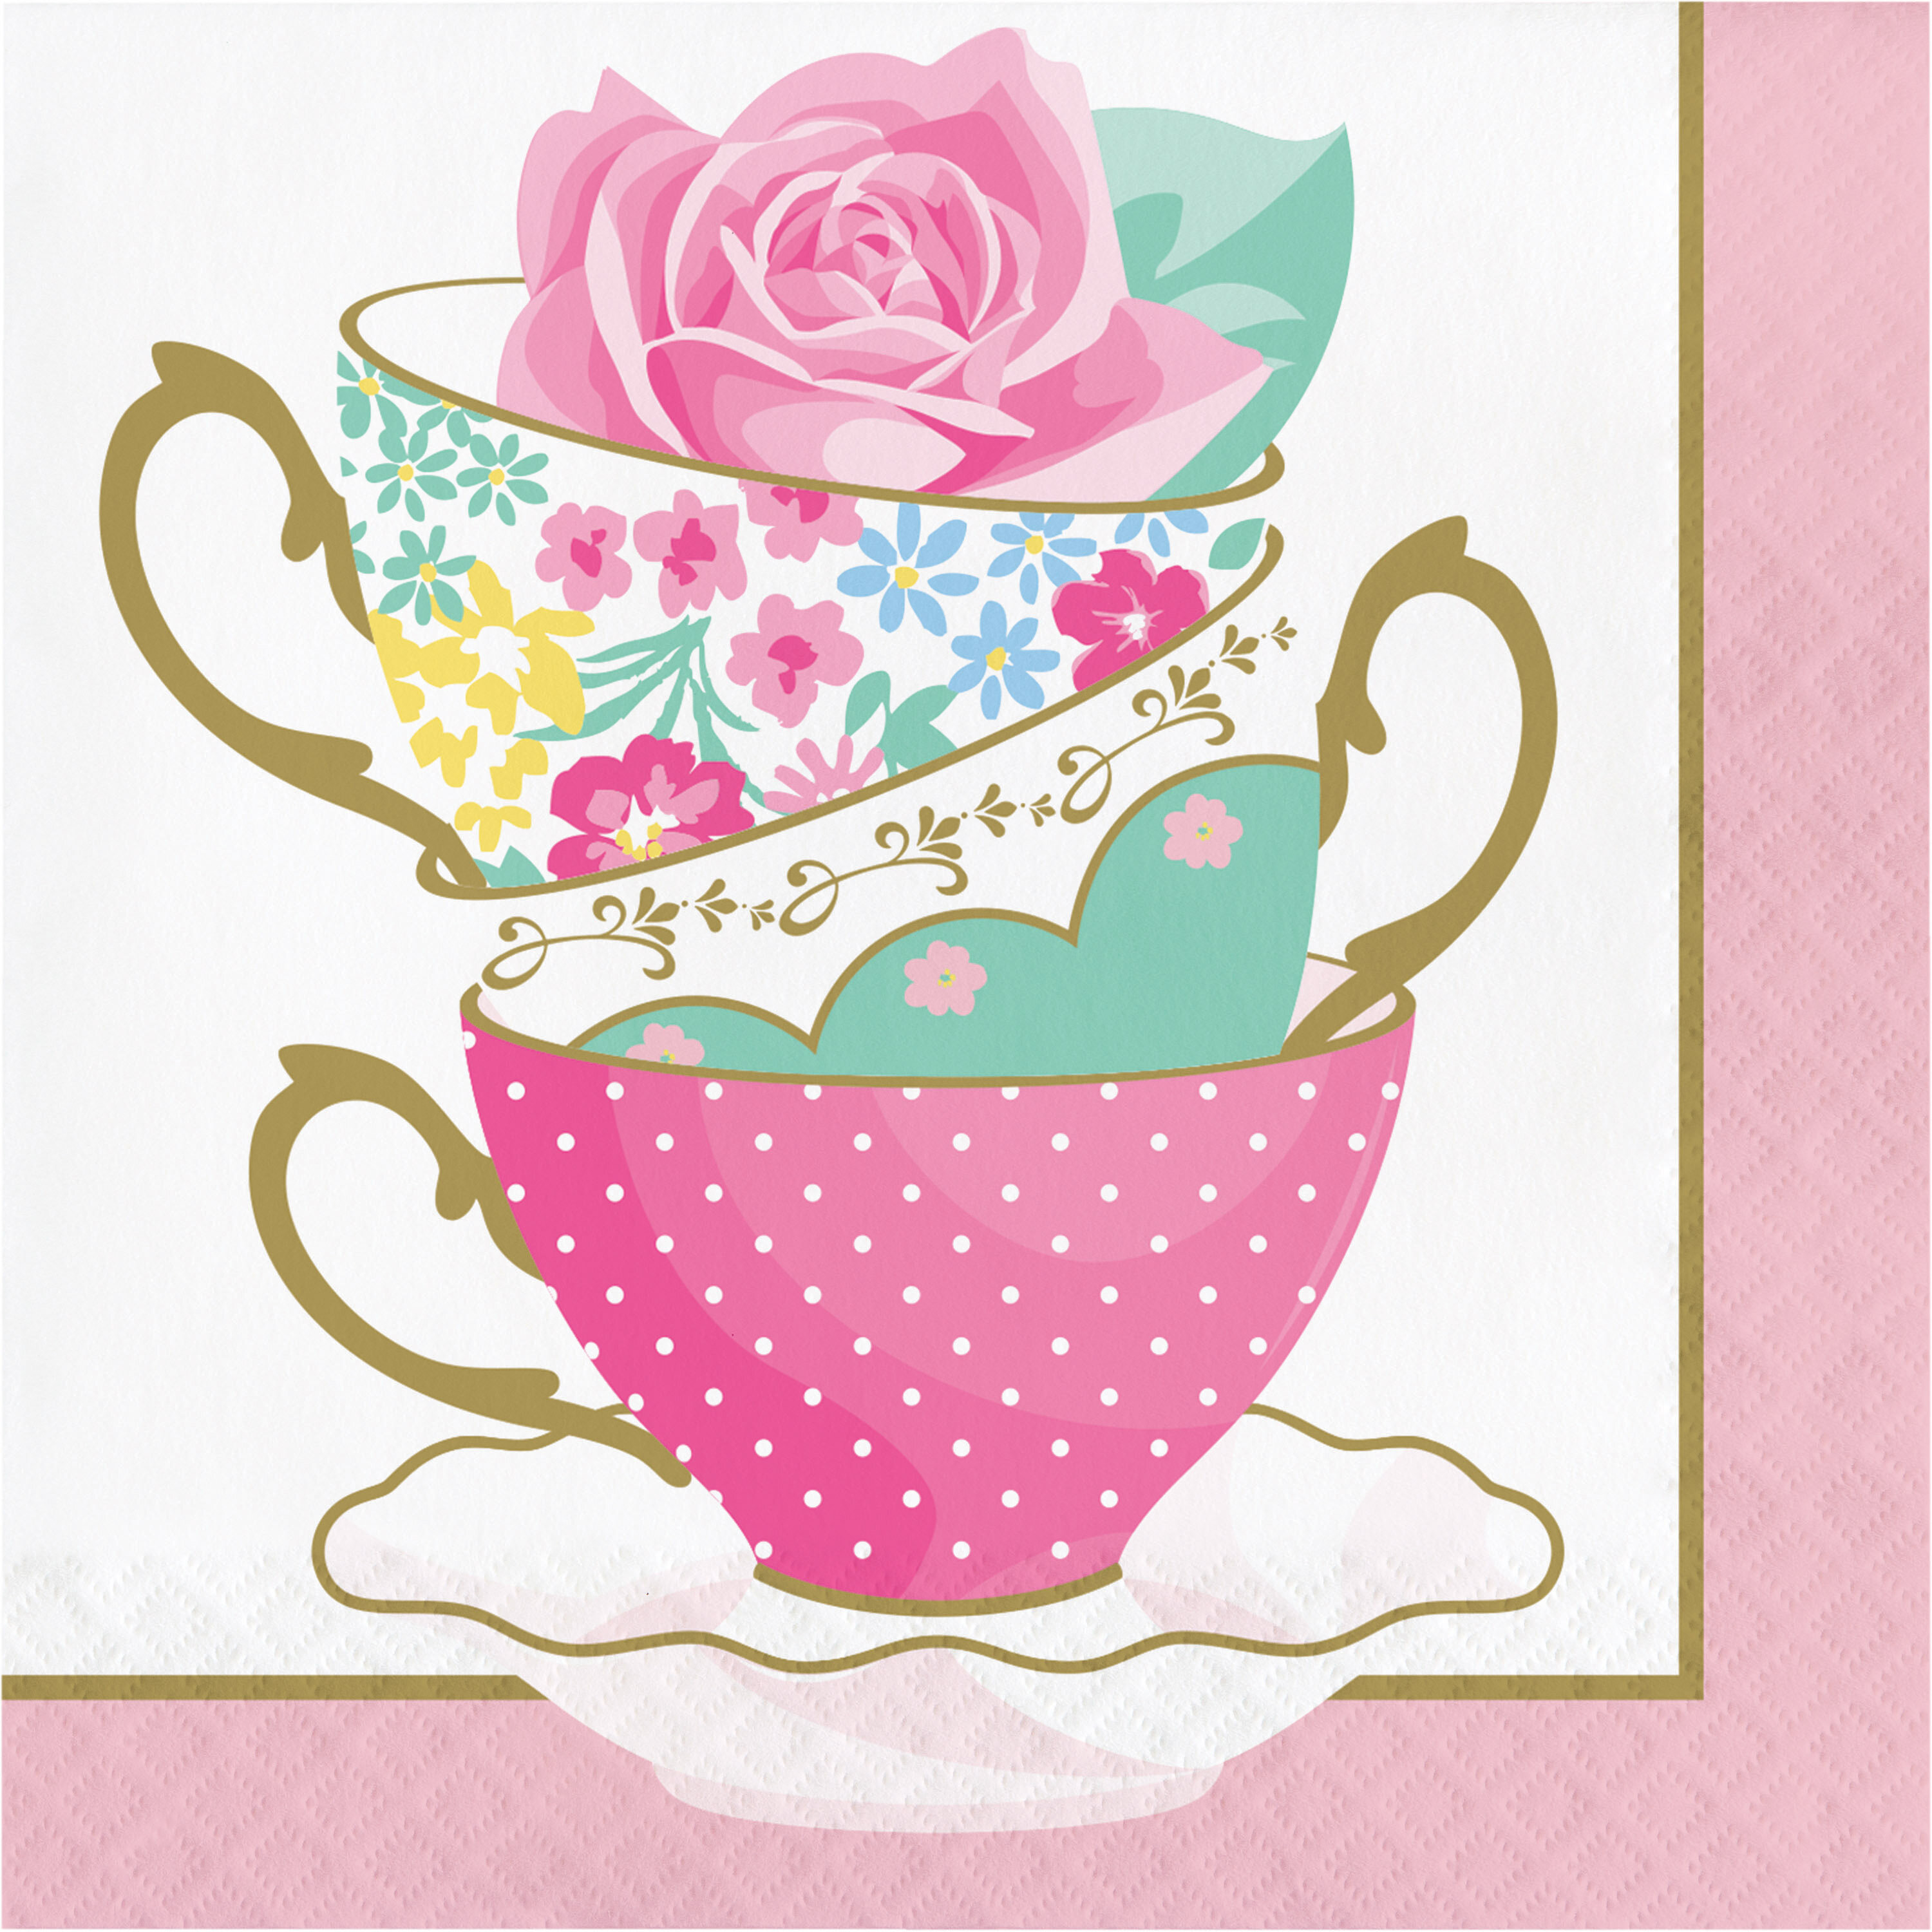 Details about   Paper Party Cups Ditsy Floral Rose Gold Edge Pack of 8 Wedding Tea Party 